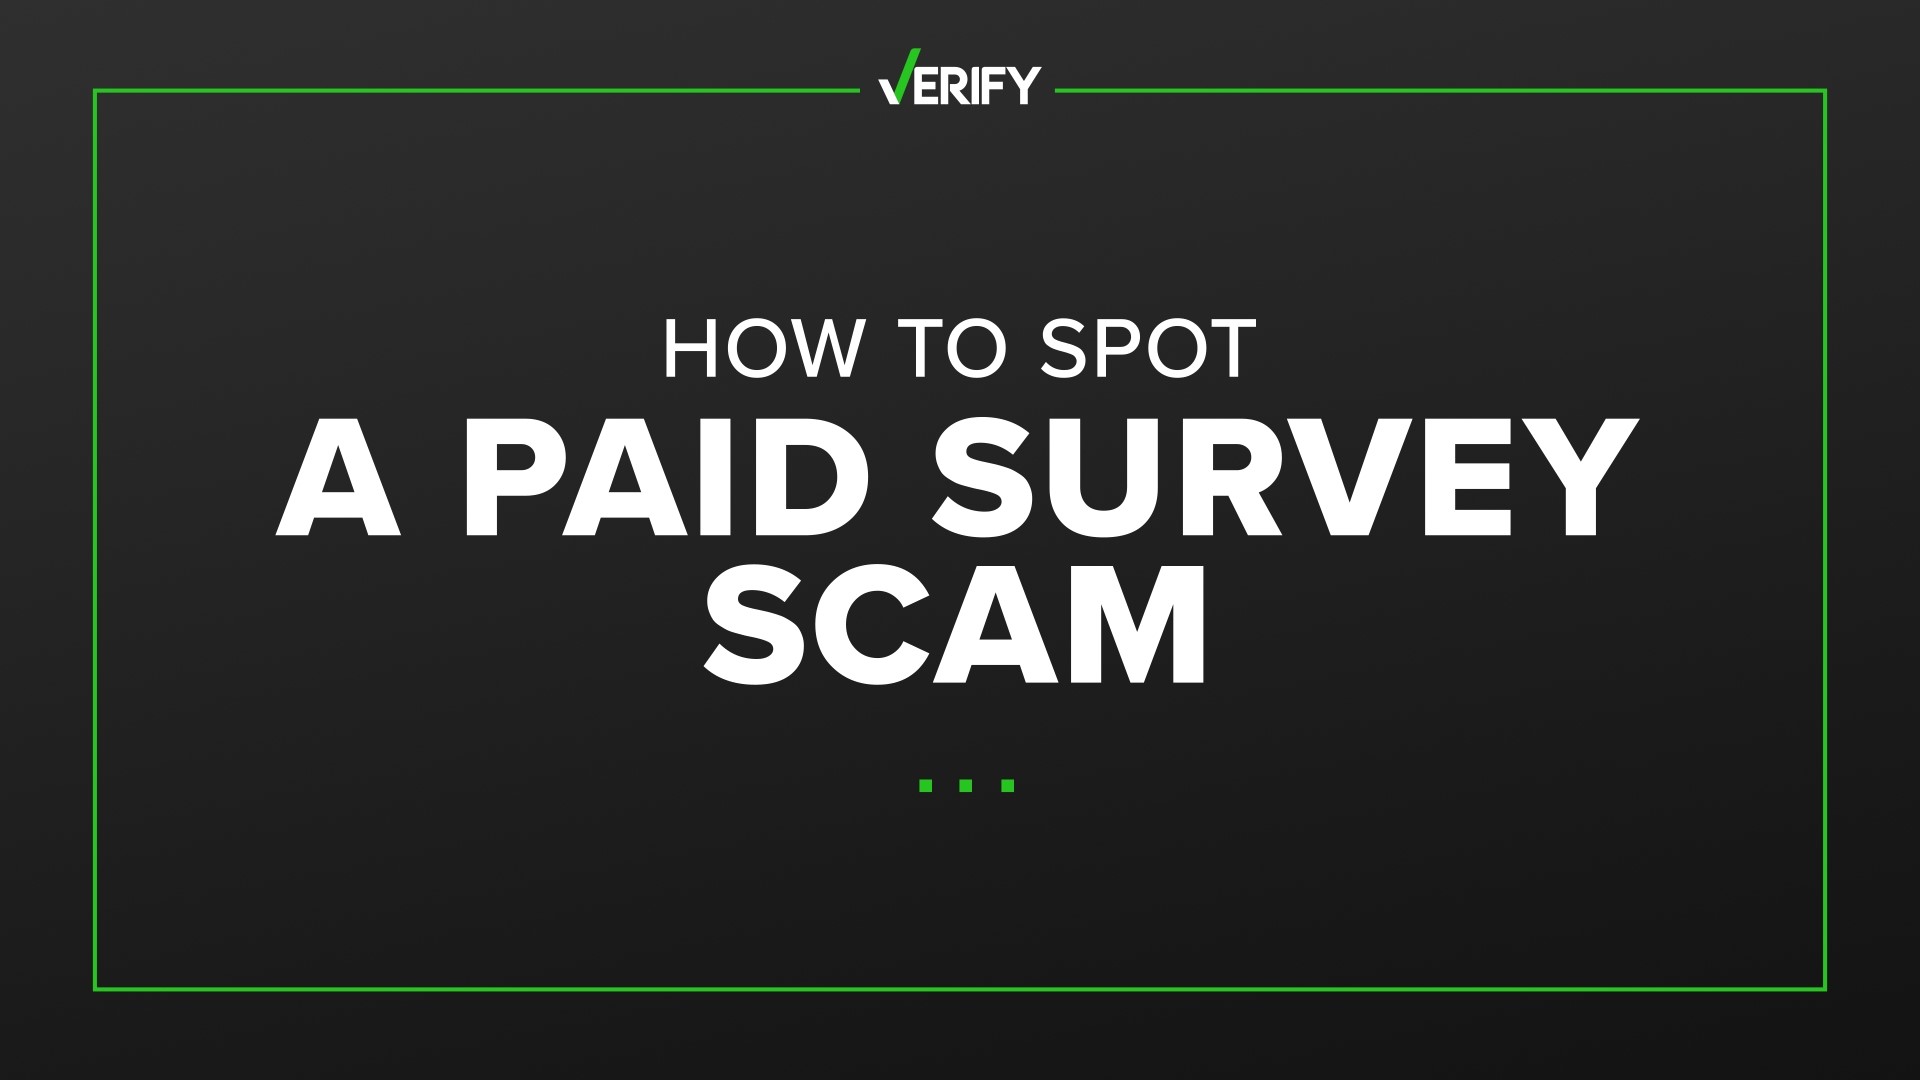 Phony paid surveys are a common way for scammers to acquire personal information and steal people’s identities. Here’s how to spot them.